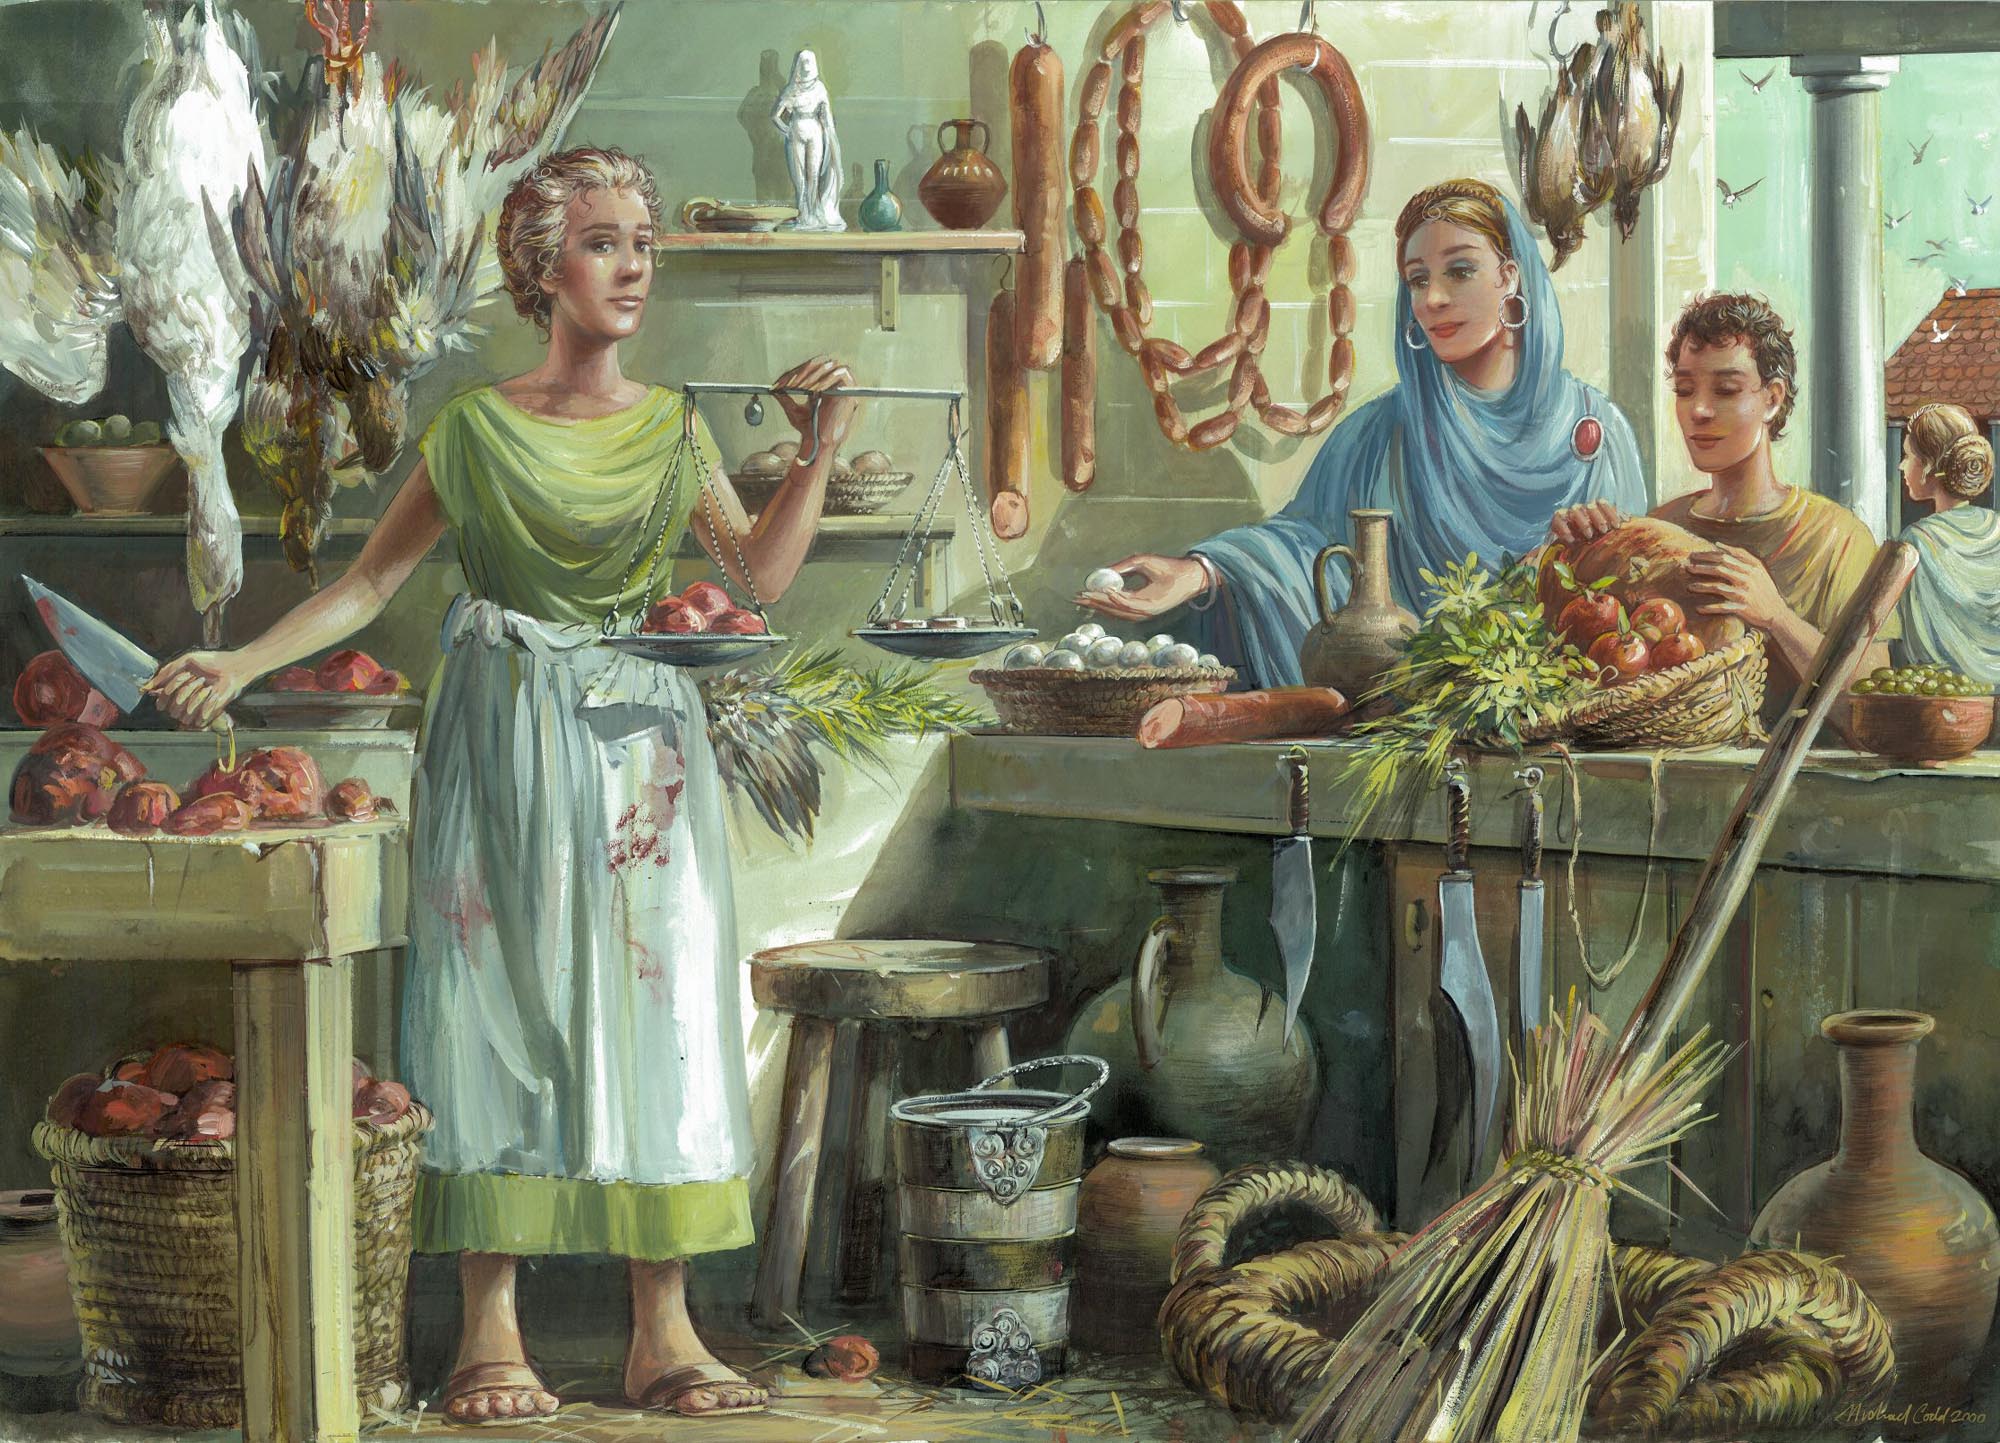 Fresh meat and vegetables on sale in a Roman shop - Mike Codd / Leicester Arts & Museums Service